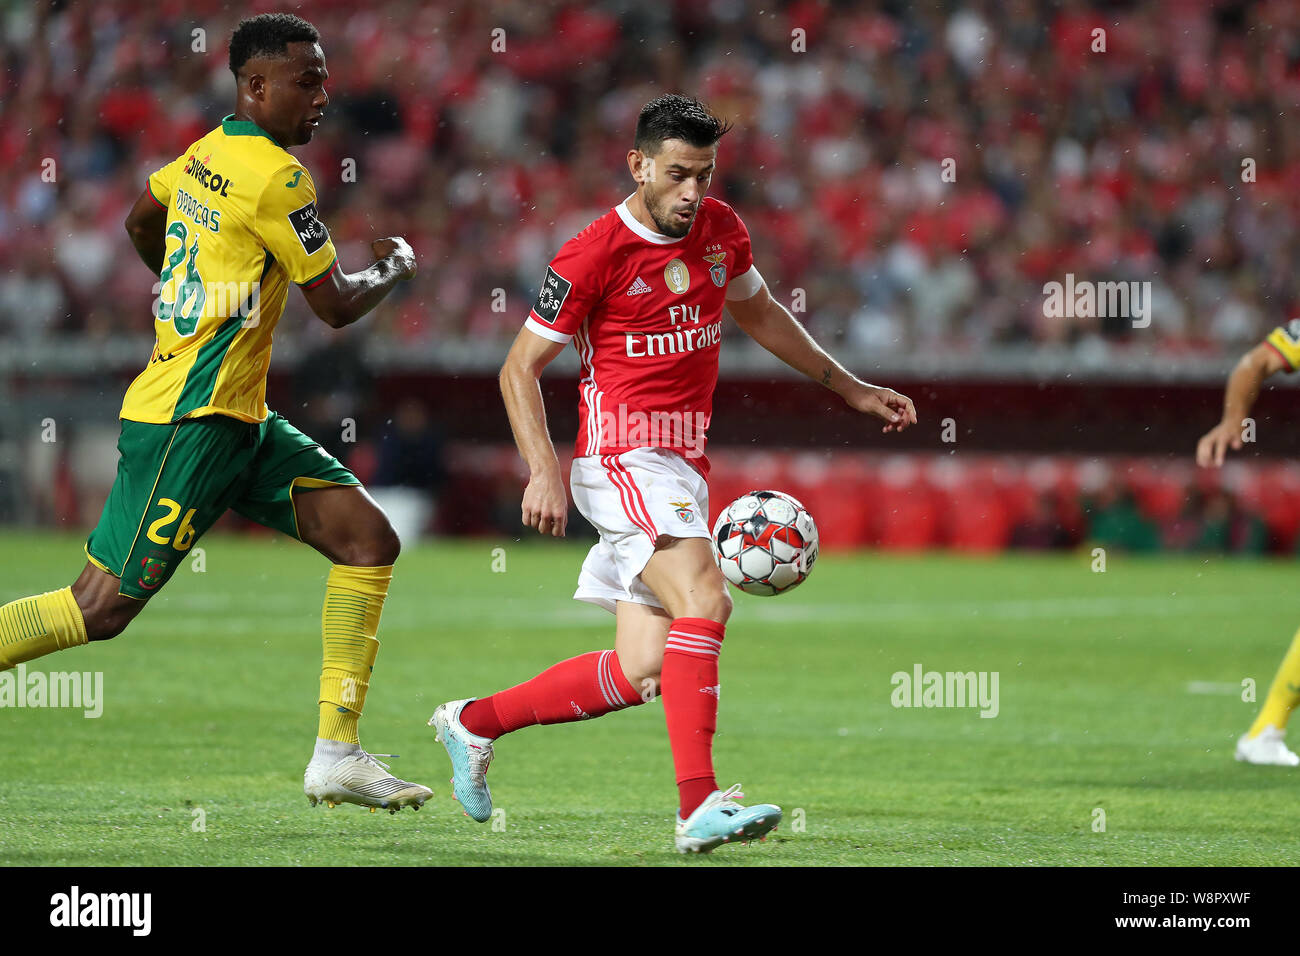 Lisbon, Portugal. 10th Aug, 2019. Pizzi of Benfica (R ) vies with Maracas of FC Pacos Ferreira during the Primeira Liga football match between SL Benfica and FC Pacos Ferreira at the Luz stadium in Lisbon, Portugal on August 10, 2019. Credit: Pedro Fiuza/ZUMA Wire/Alamy Live News Stock Photo